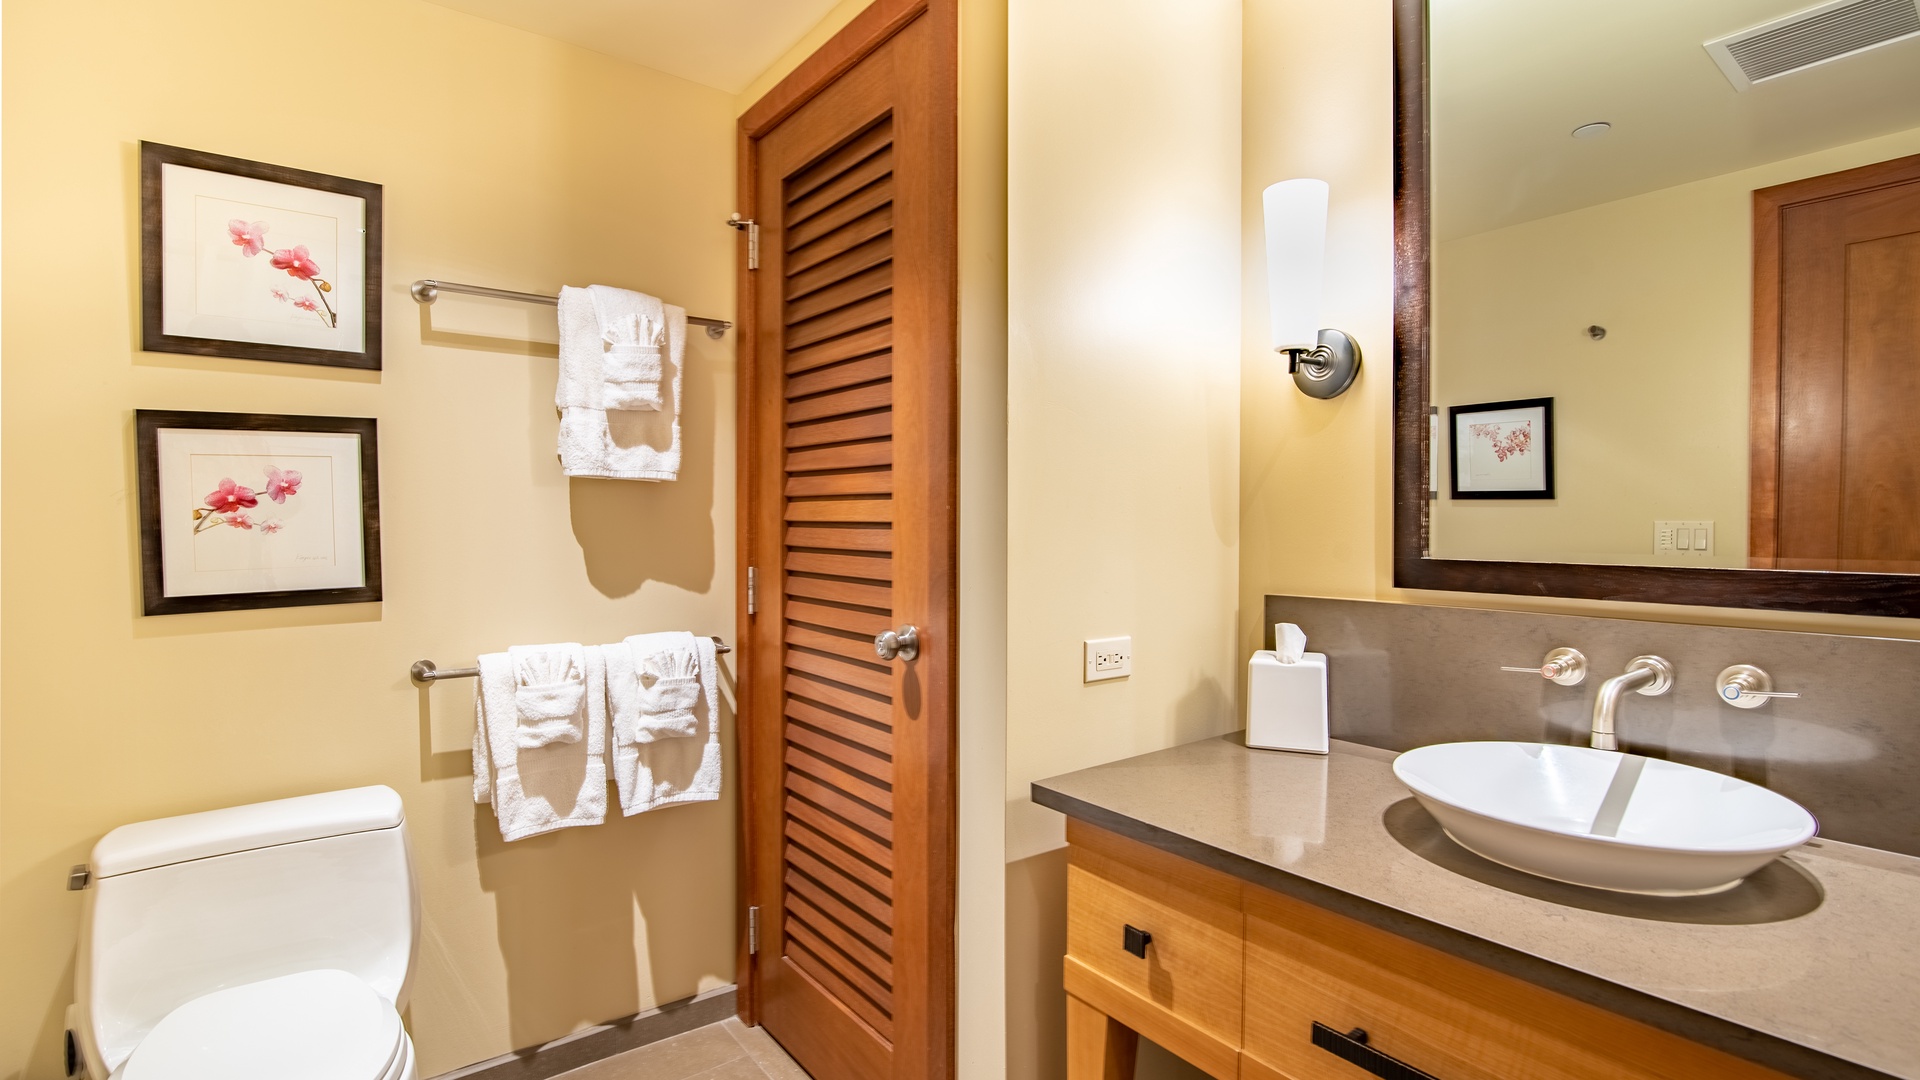 Kapolei Vacation Rentals, Ko Olina Beach Villas B609 - The second guest bathroom with warm wood accents.